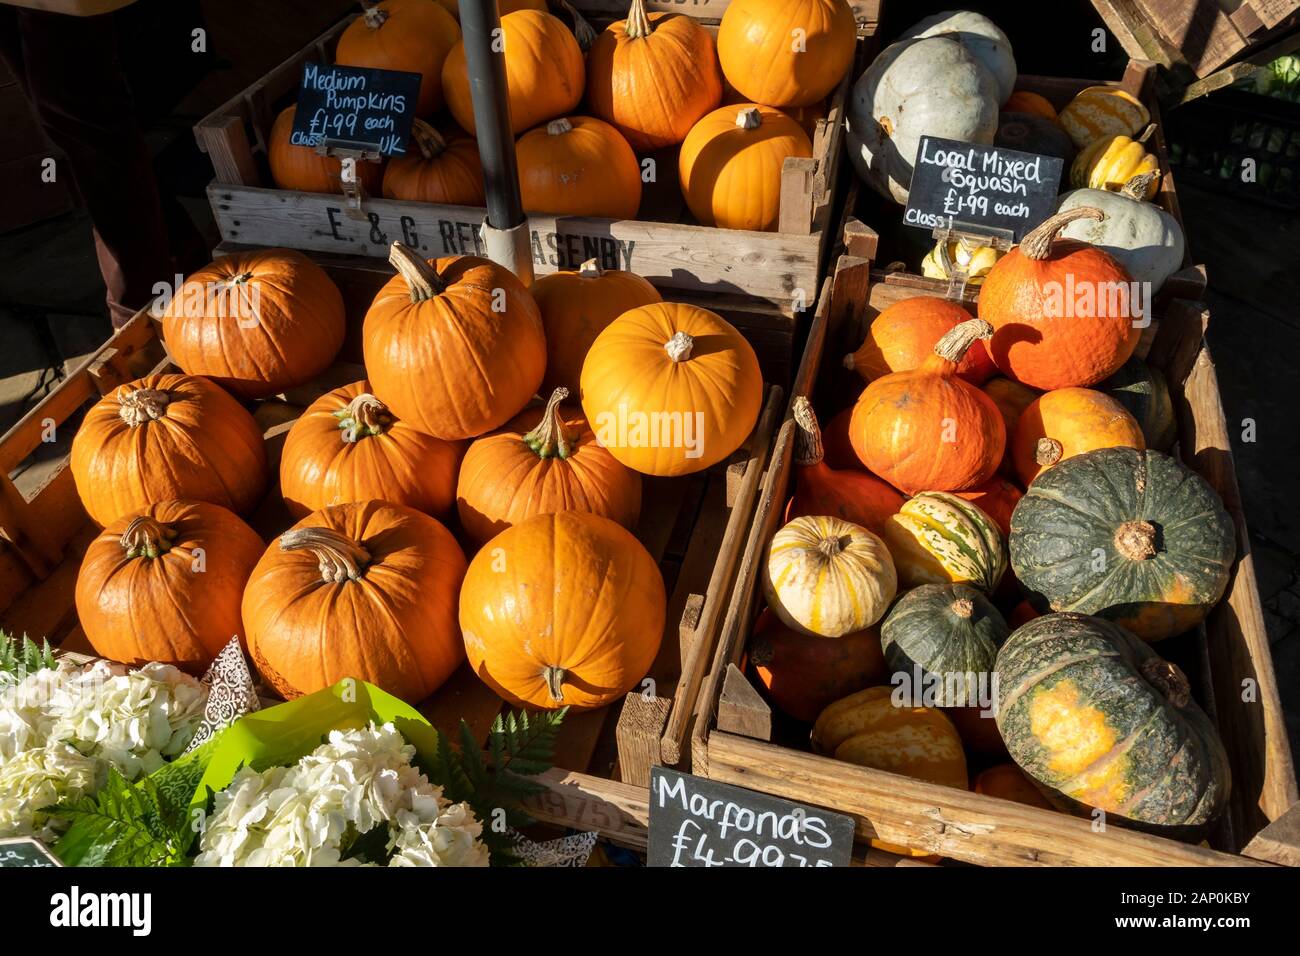 Pumpkins and mixed squashes for sale on a fruit and vegetable market stall. Stock Photo